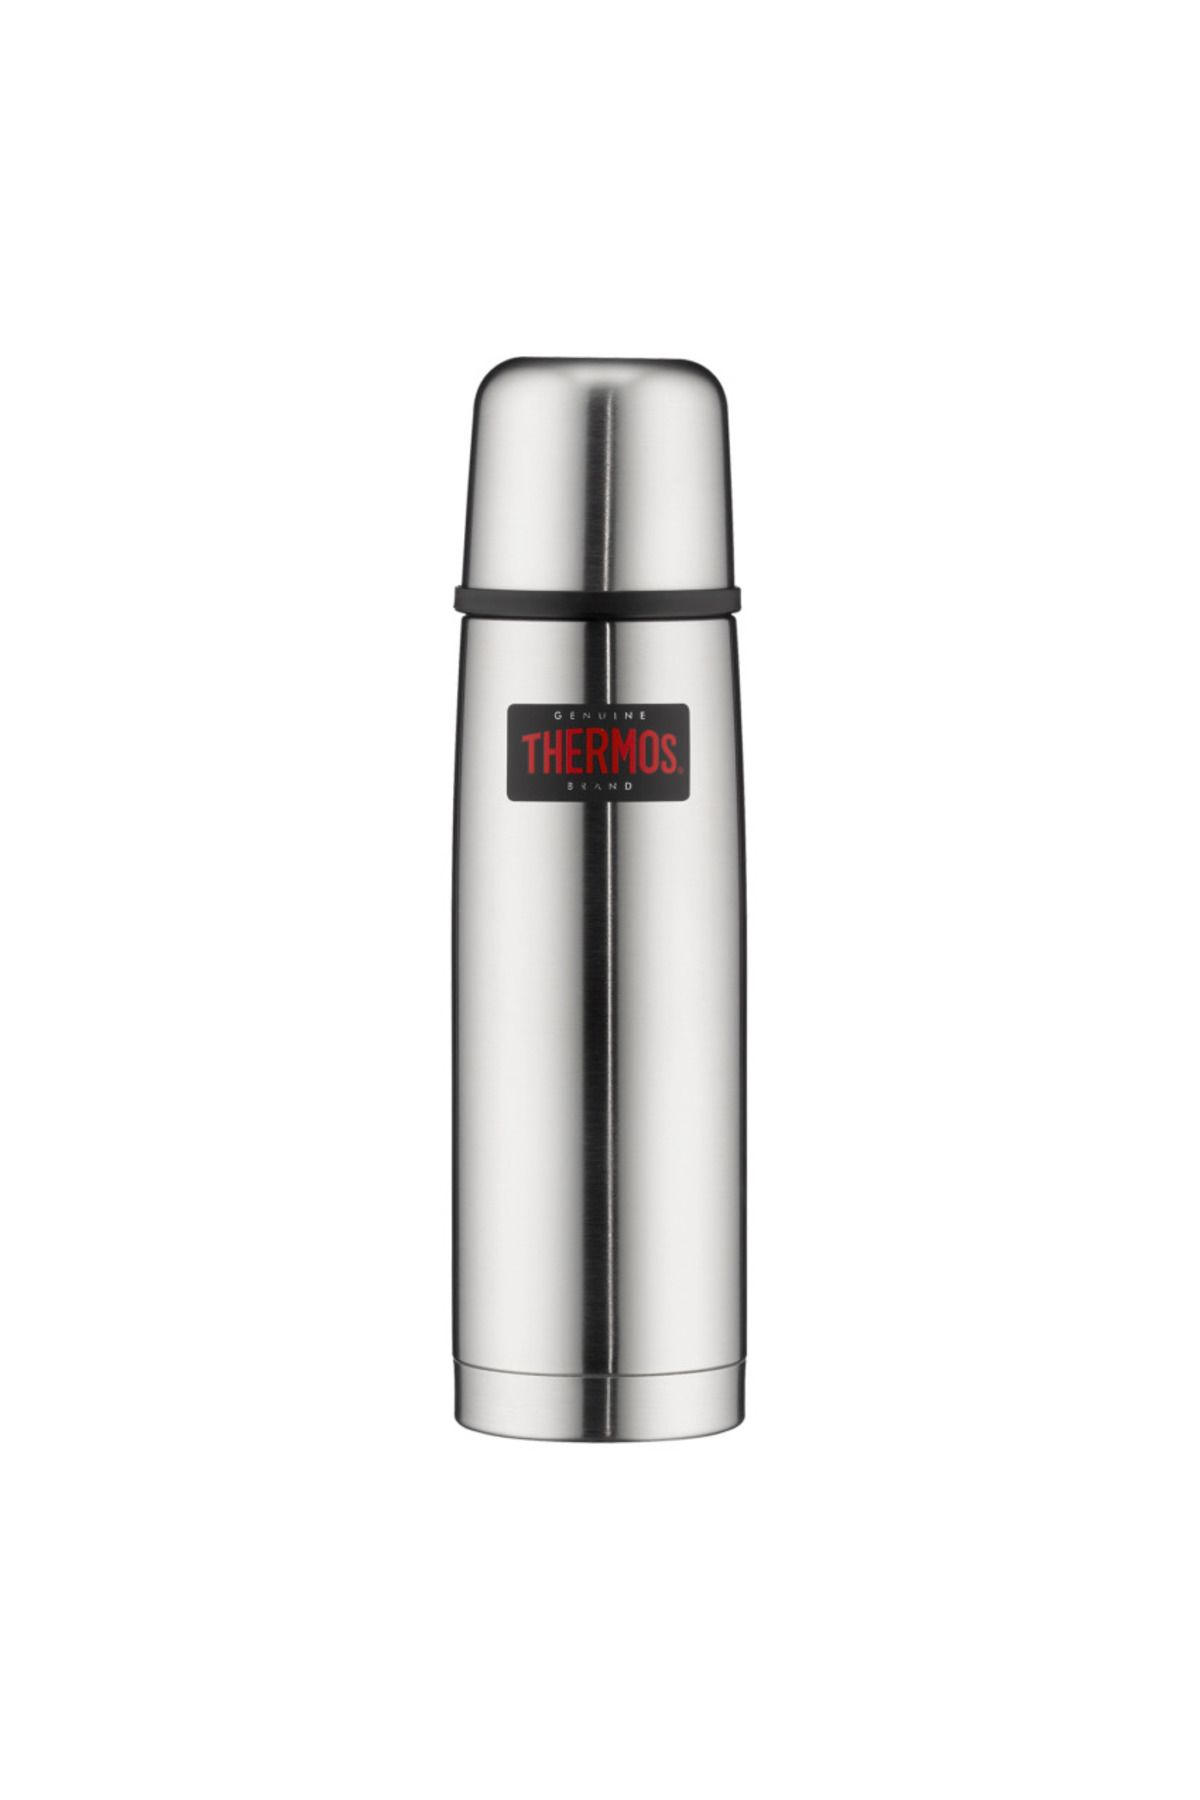 Thermos Fbb-500 Staltermos Classic 0,5 Lt. Stainless Steel 184093